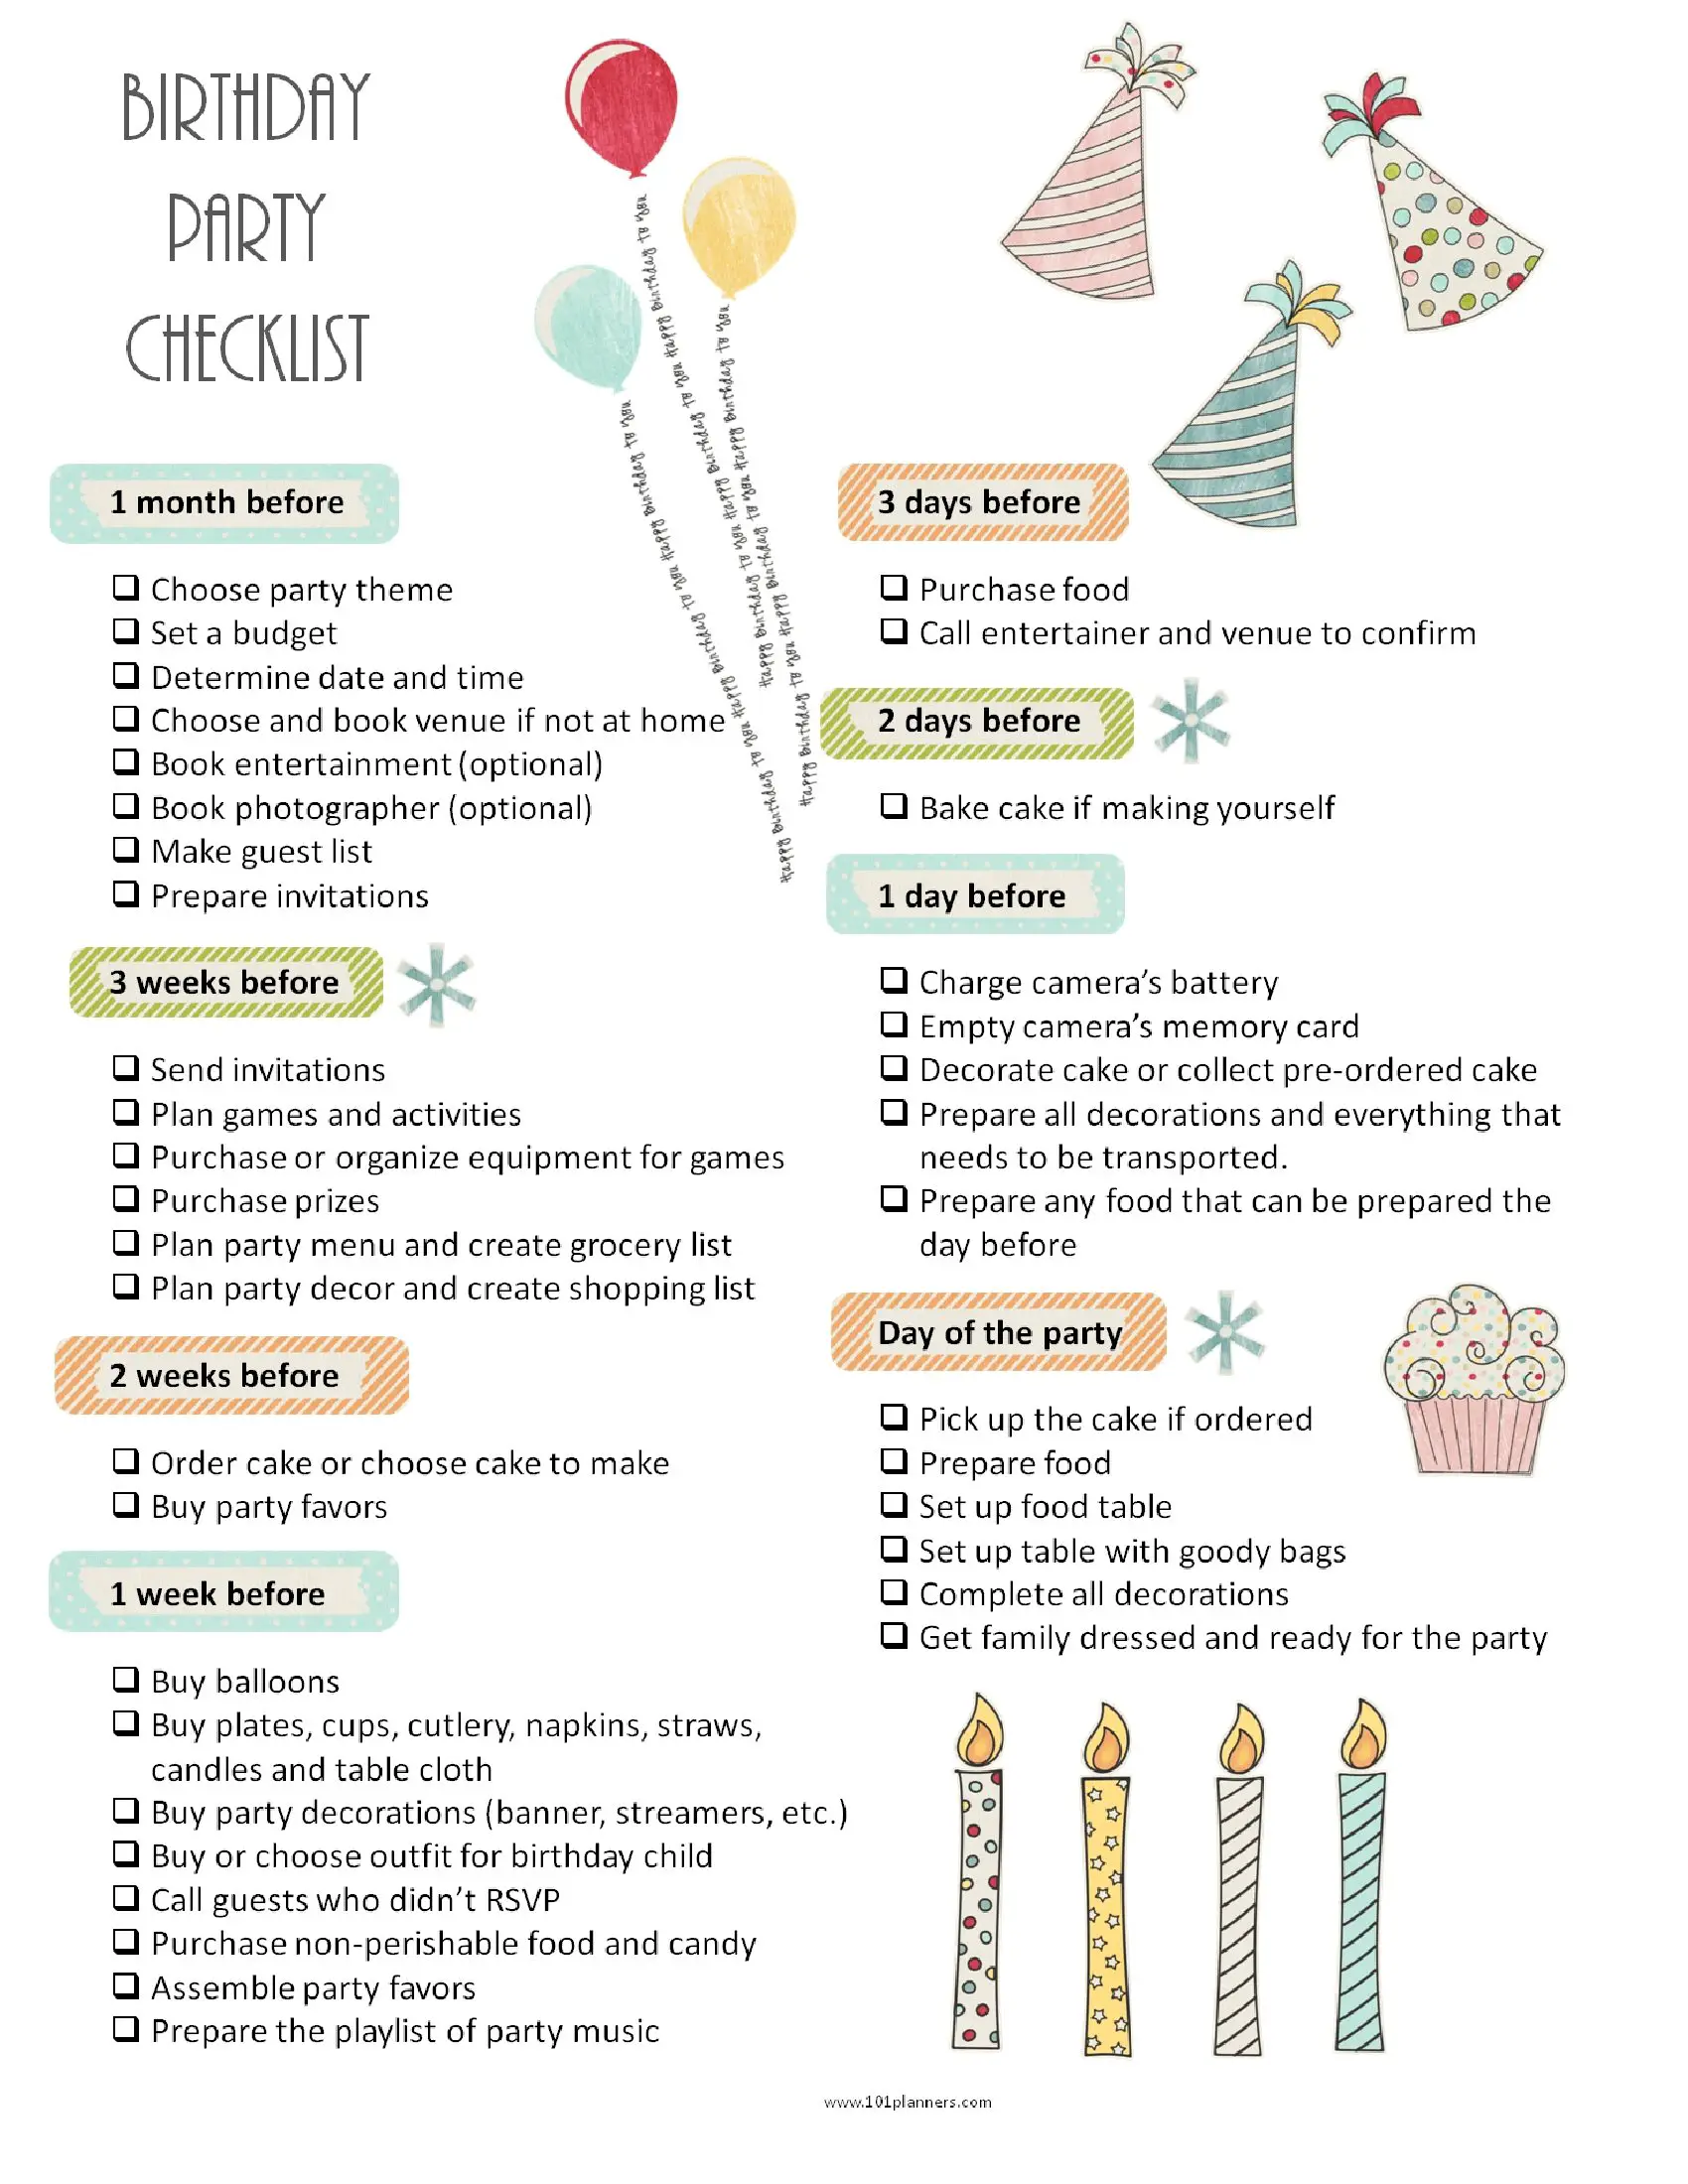 26 Life easing Birthday  Party  Checklists  KittyBabyLove com